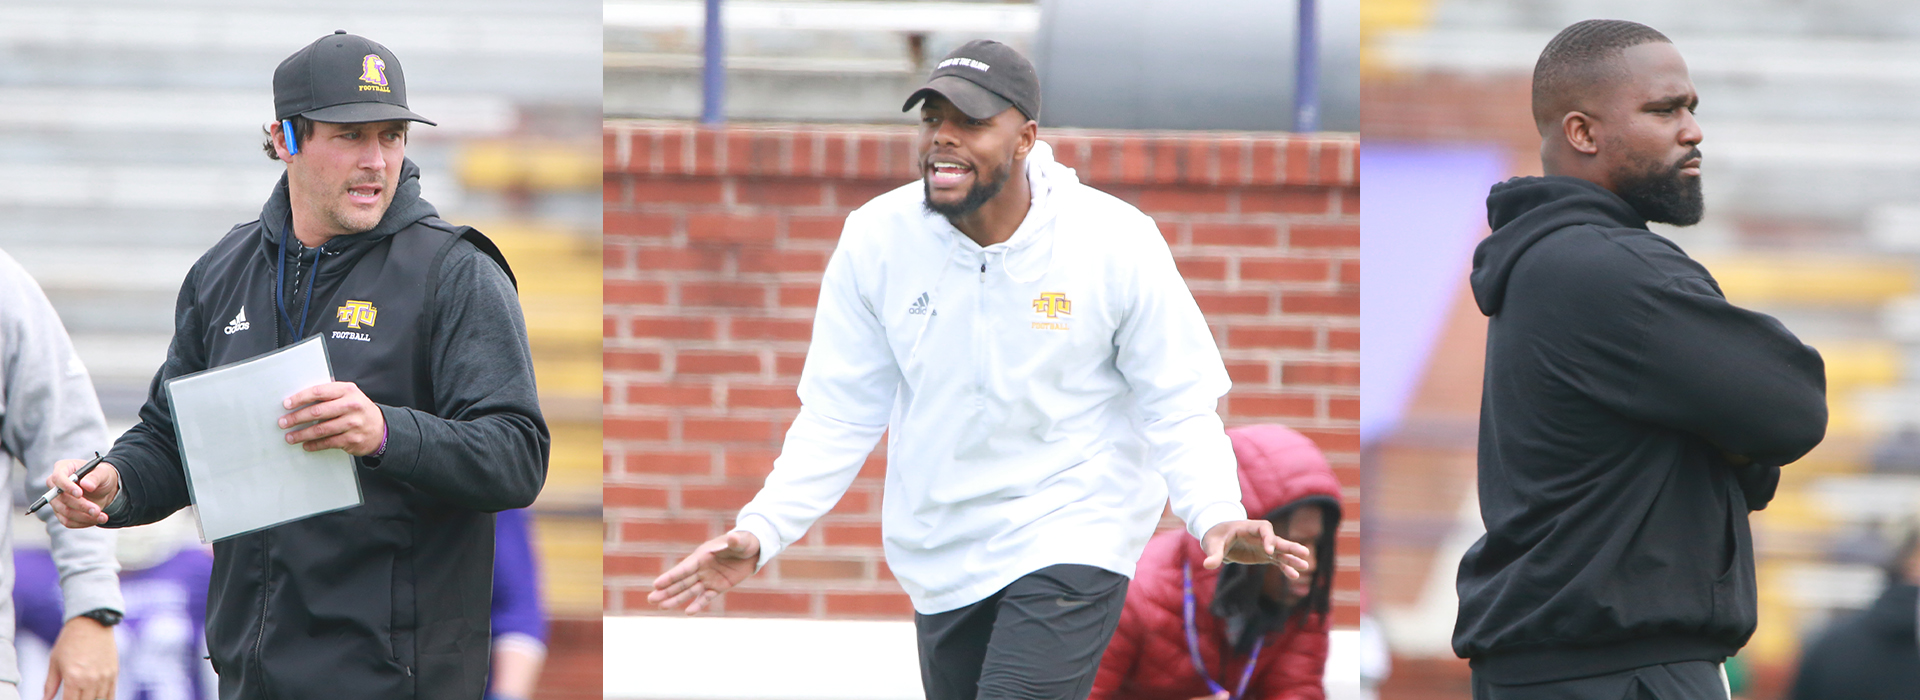 Satterfield, Watson and Brown finalize 2022 Golden Eagle football staff